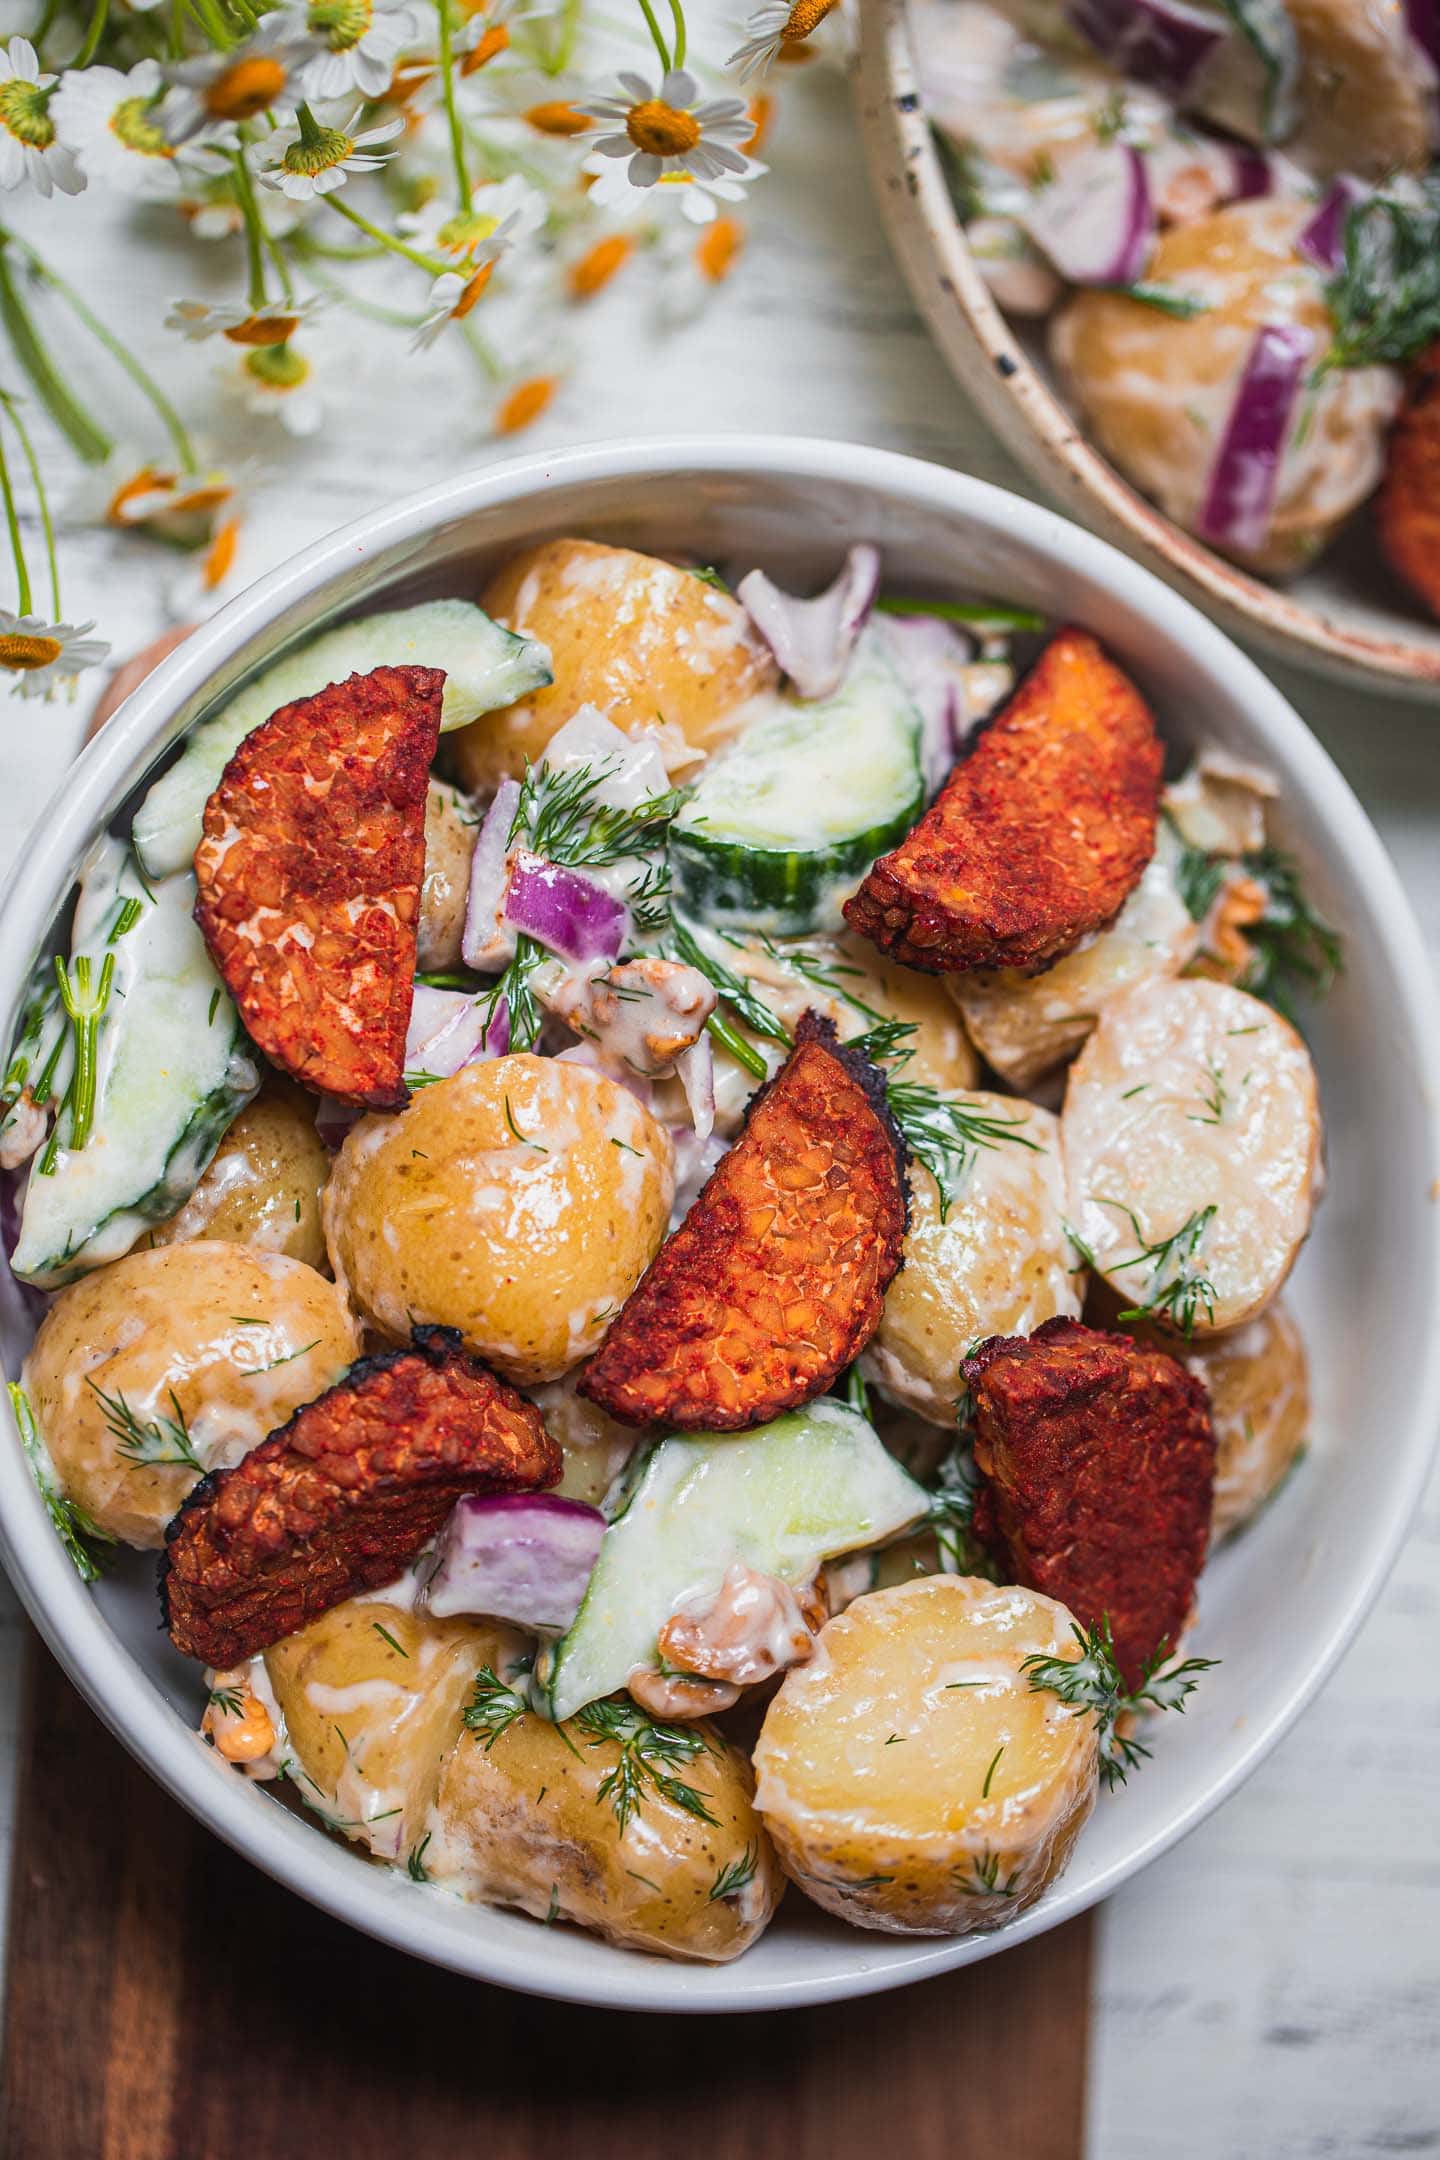 Bowl with dairy-free potato salad and tempeh bites